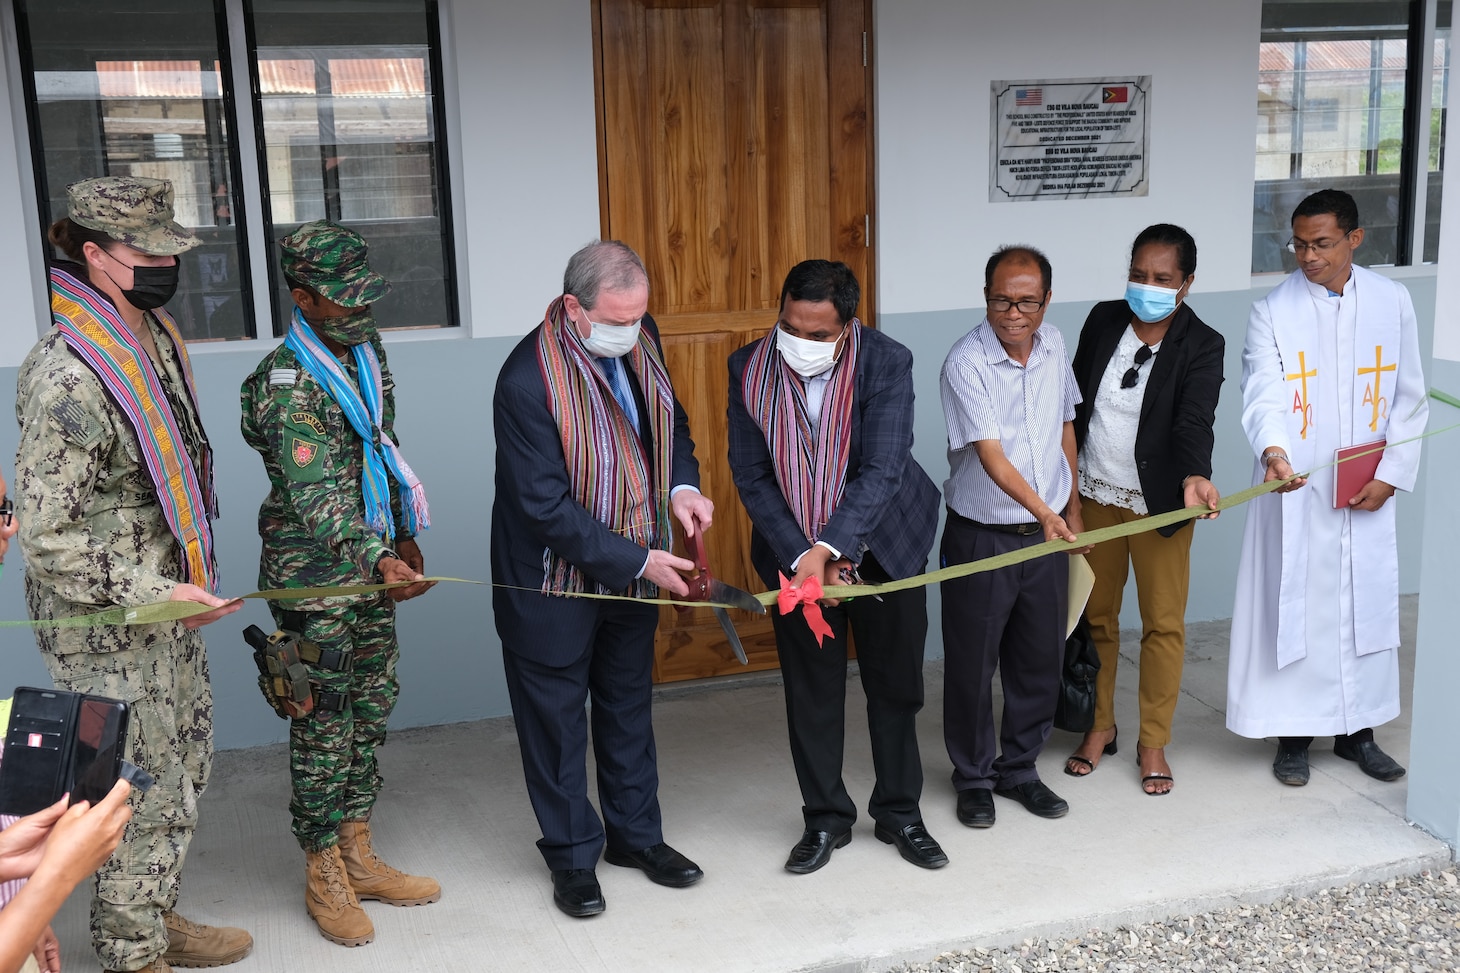 BAUCAU, Timor-Leste (Dec. 10, 2021) Lt. Megan Dunton, with Naval Mobile Construction Battalion (NMCB) 5; Thomas Daley, U.S. Embassy Chargé d’Affairs; and local Timorese leaders cut the ribbon at the completion of the four-room schoolhouse in Baucau, Timor-Leste. The U.S. Navy Seabees with NMCB-5 are deployed to the U.S. 7th Fleet area of operations, supporting a free and open Indo-Pacific, strengthening their alliances and partnerships, and providing general engineering and civil support to joint operational forces. Homeported out of Port Hueneme, California, NMCB-5 has 13 detail sites deployed throughout the U.S. and Indo-Pacific area of operations.